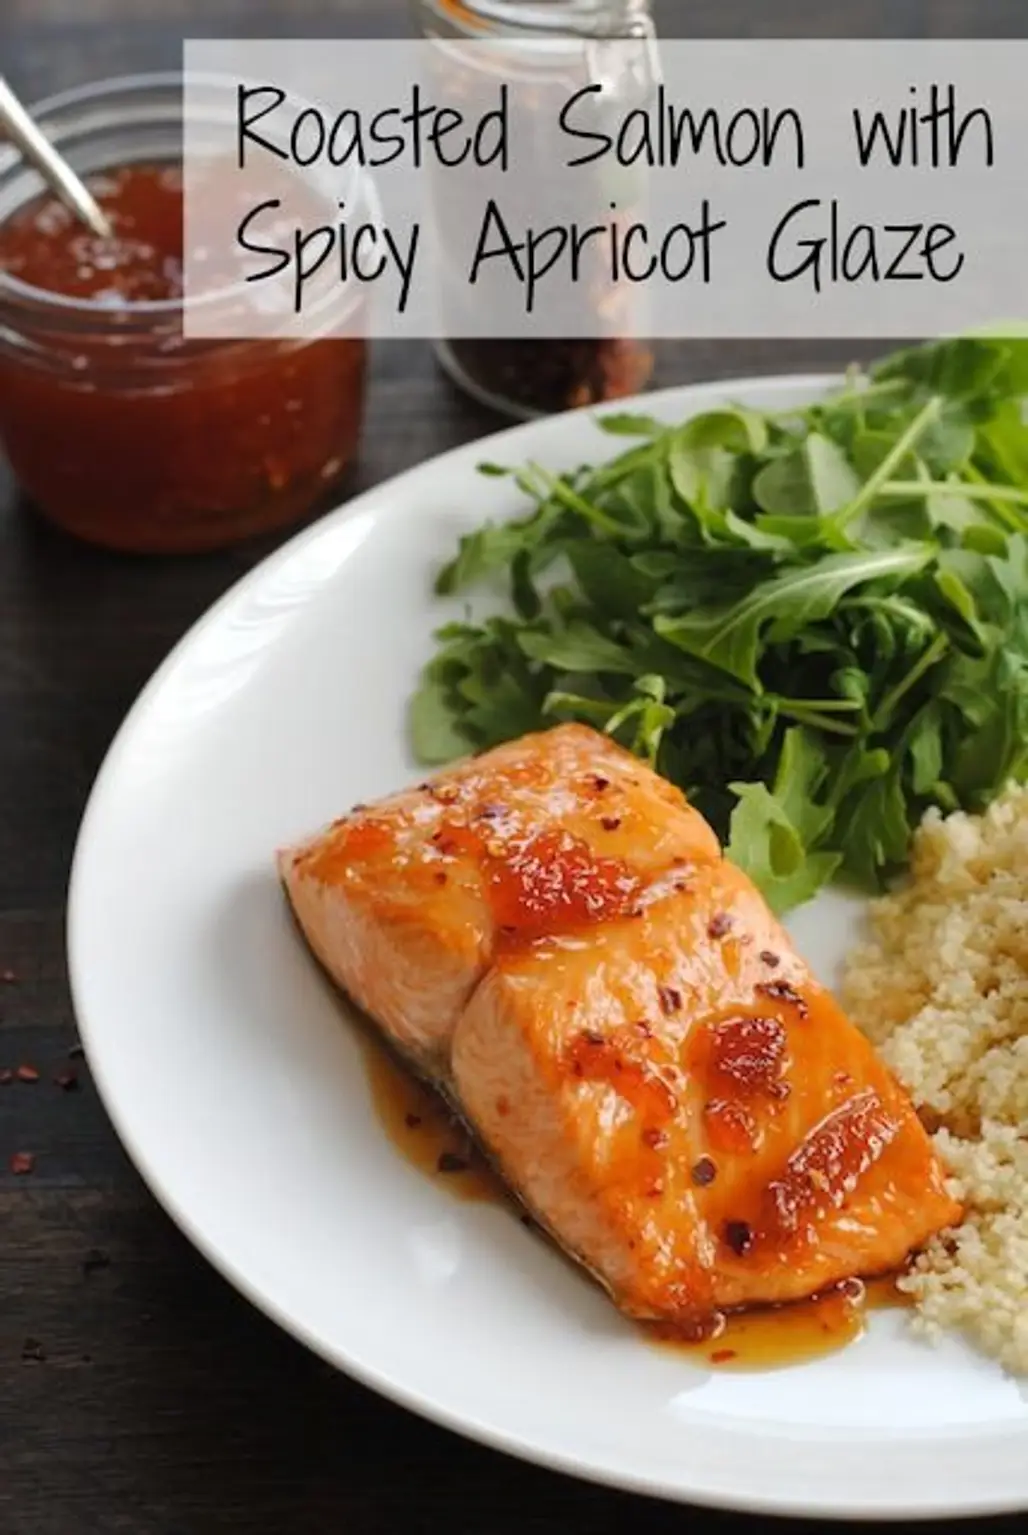 Roasted Salmon with Spicy Apricot Glaze